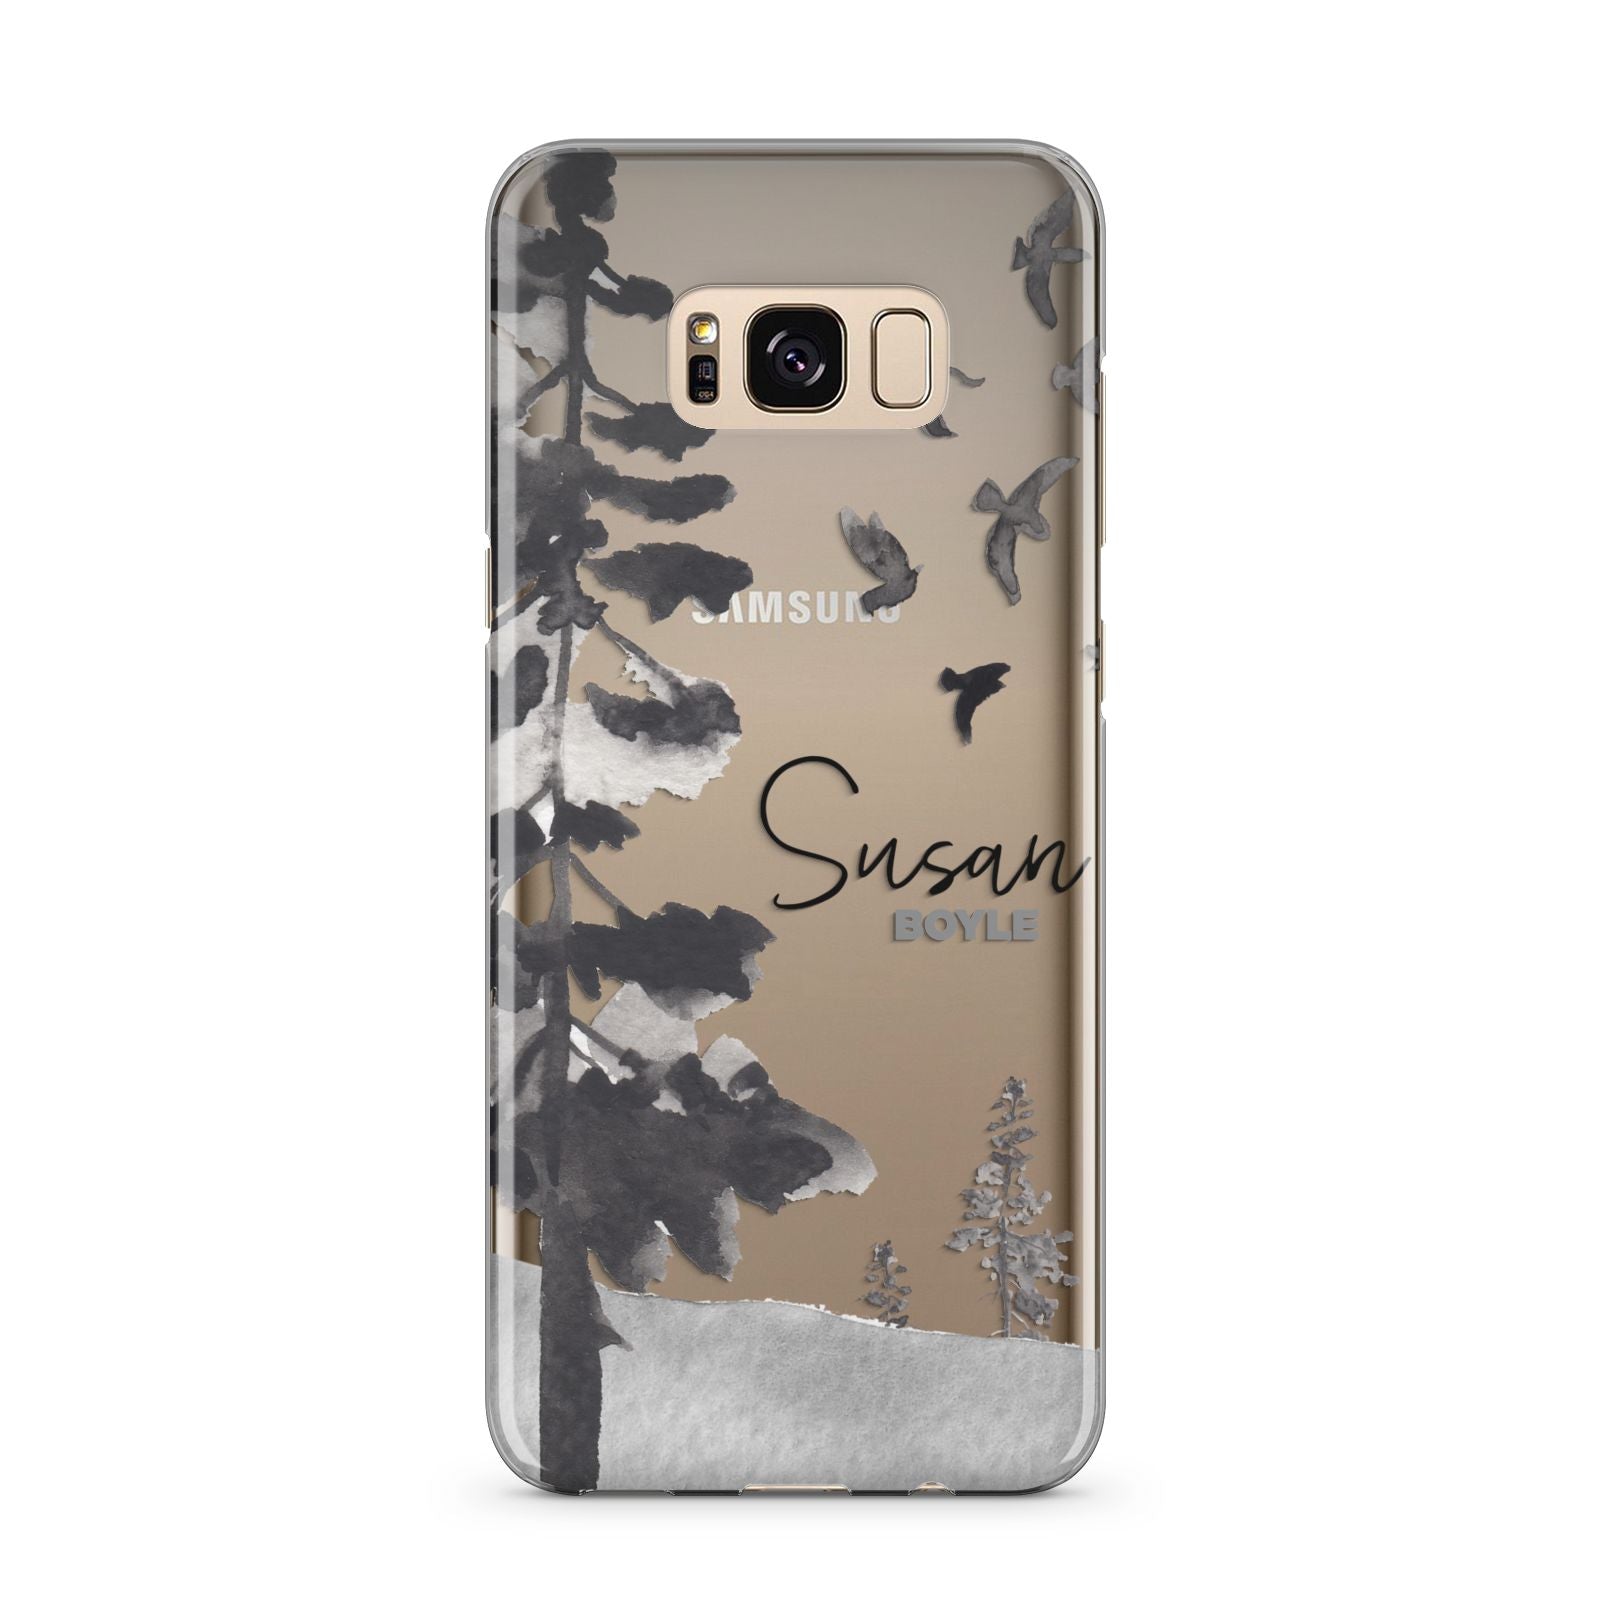 Personalised Monochrome Forest Samsung Galaxy S8 Plus Case